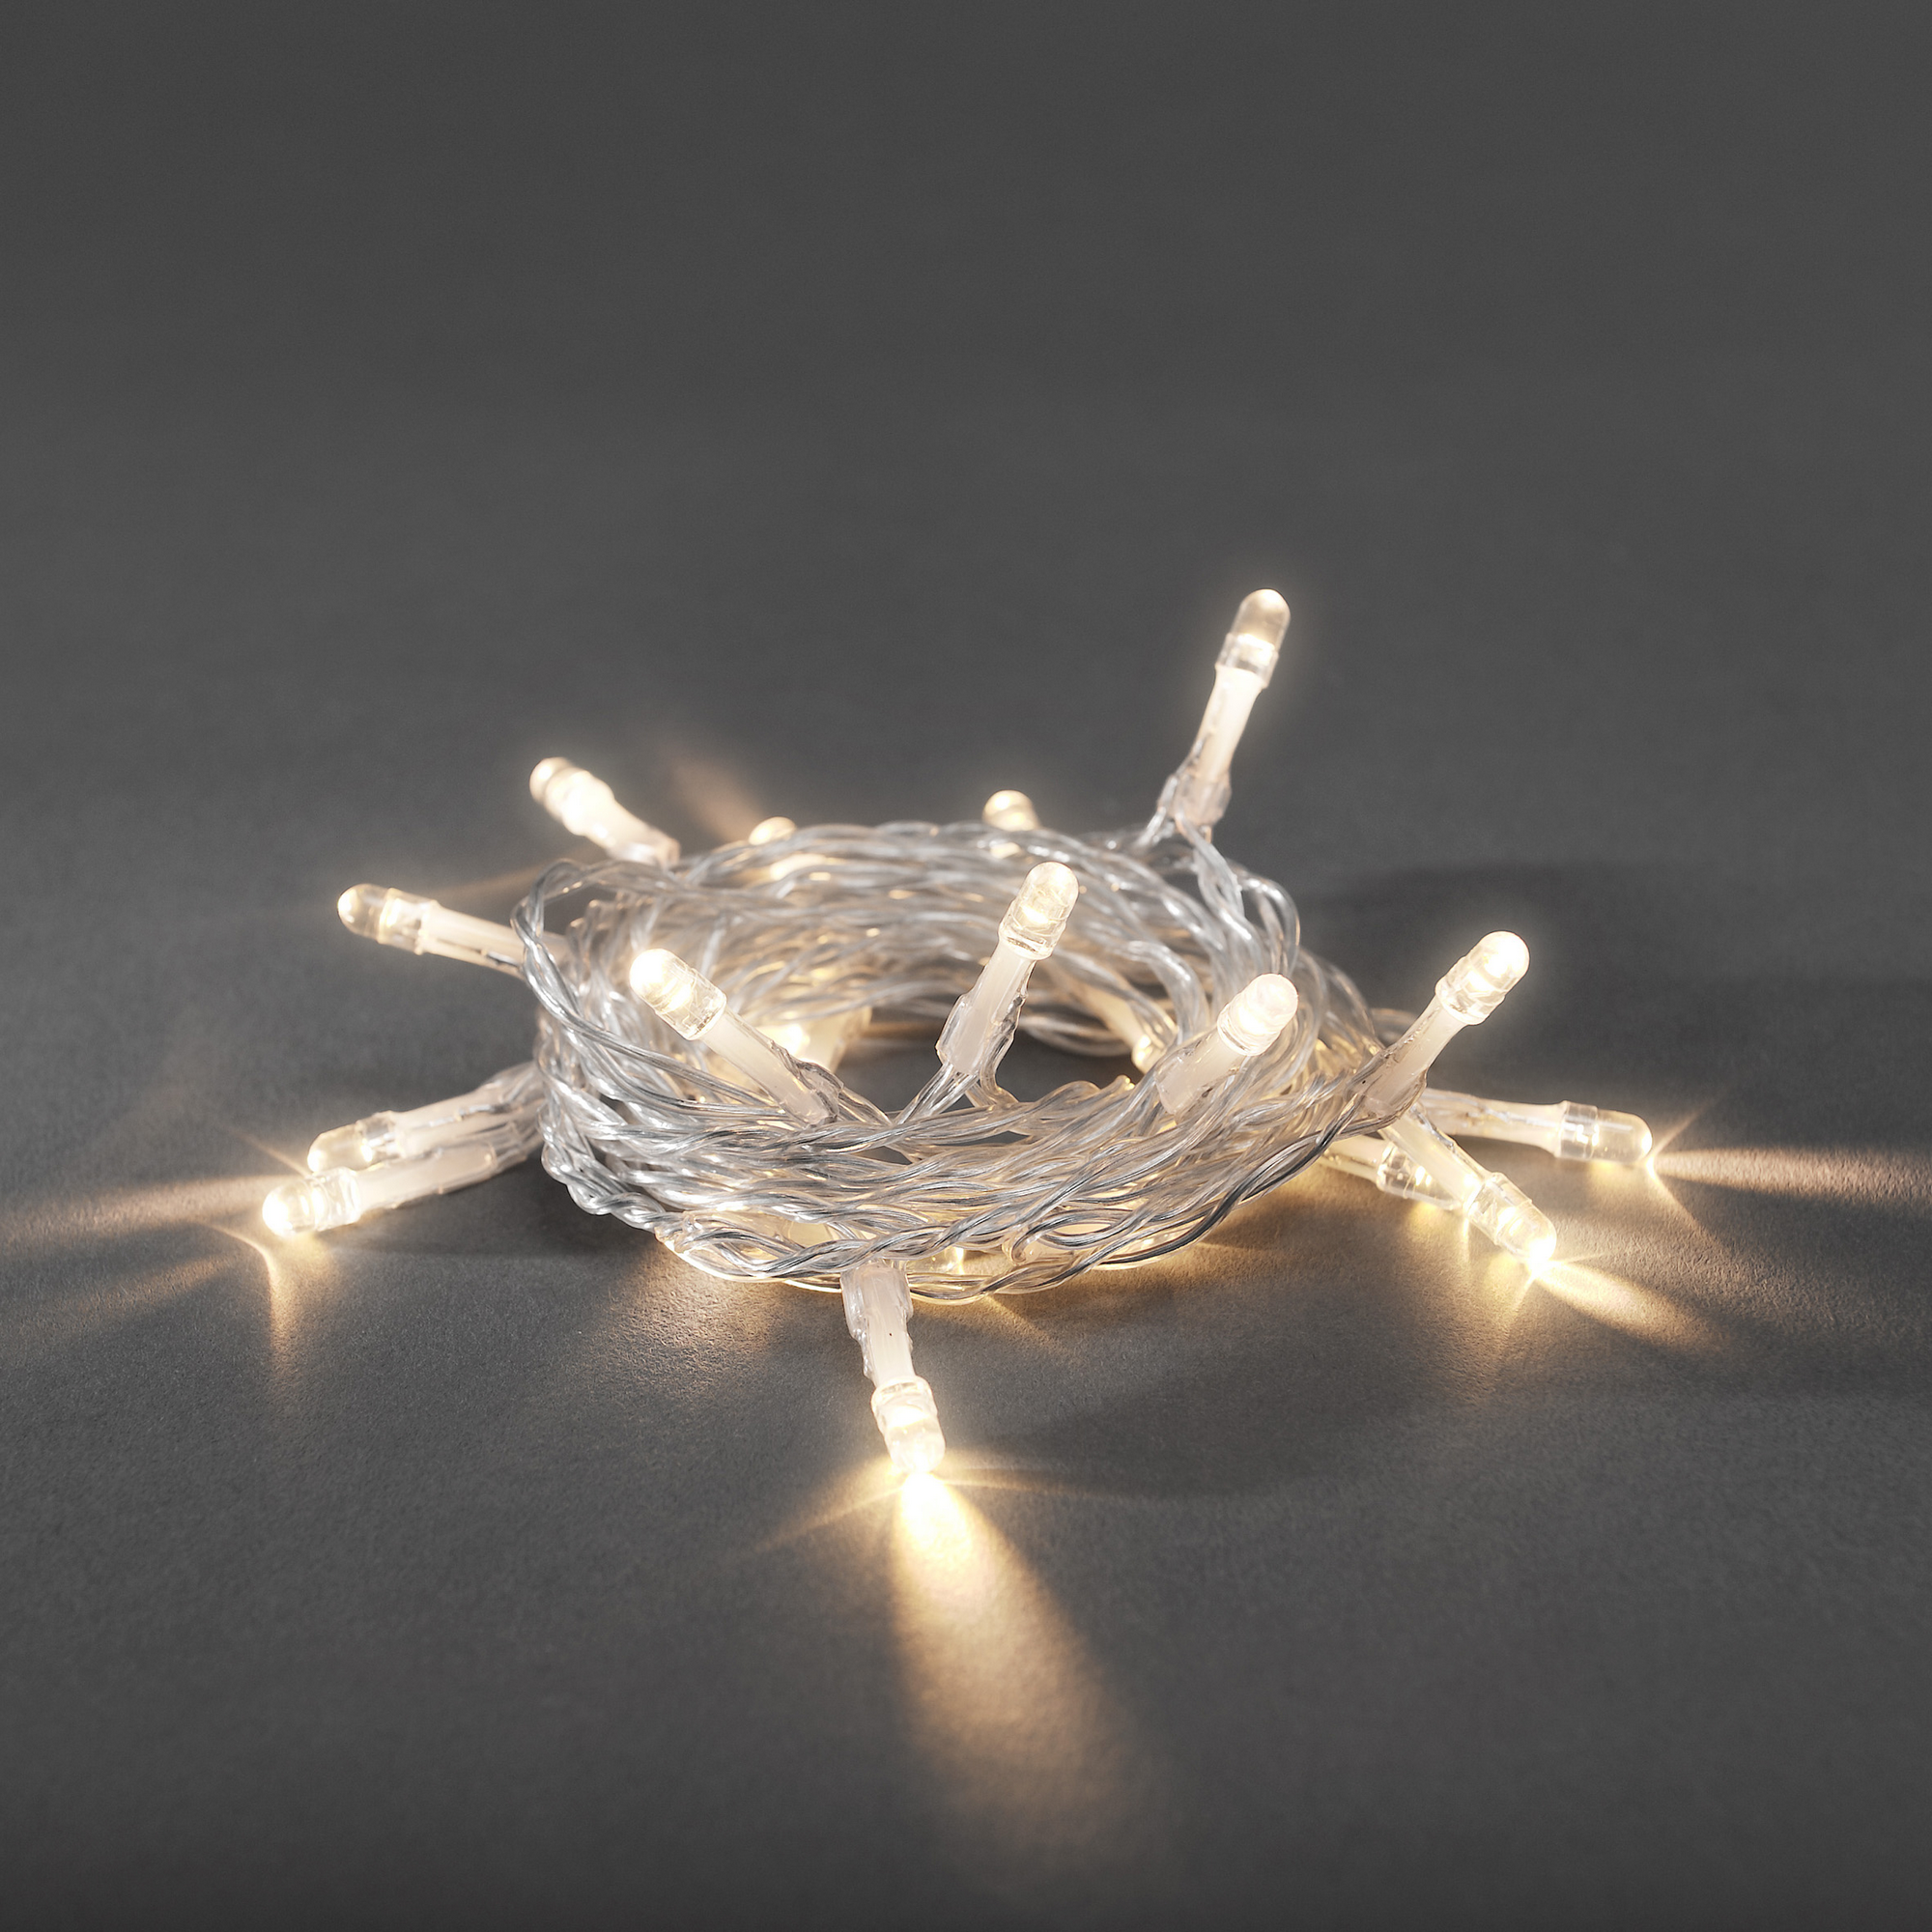 Weihnachtsbeleuchtung LED-Lichterkette weiß 20 LEDs 335 m + product picture